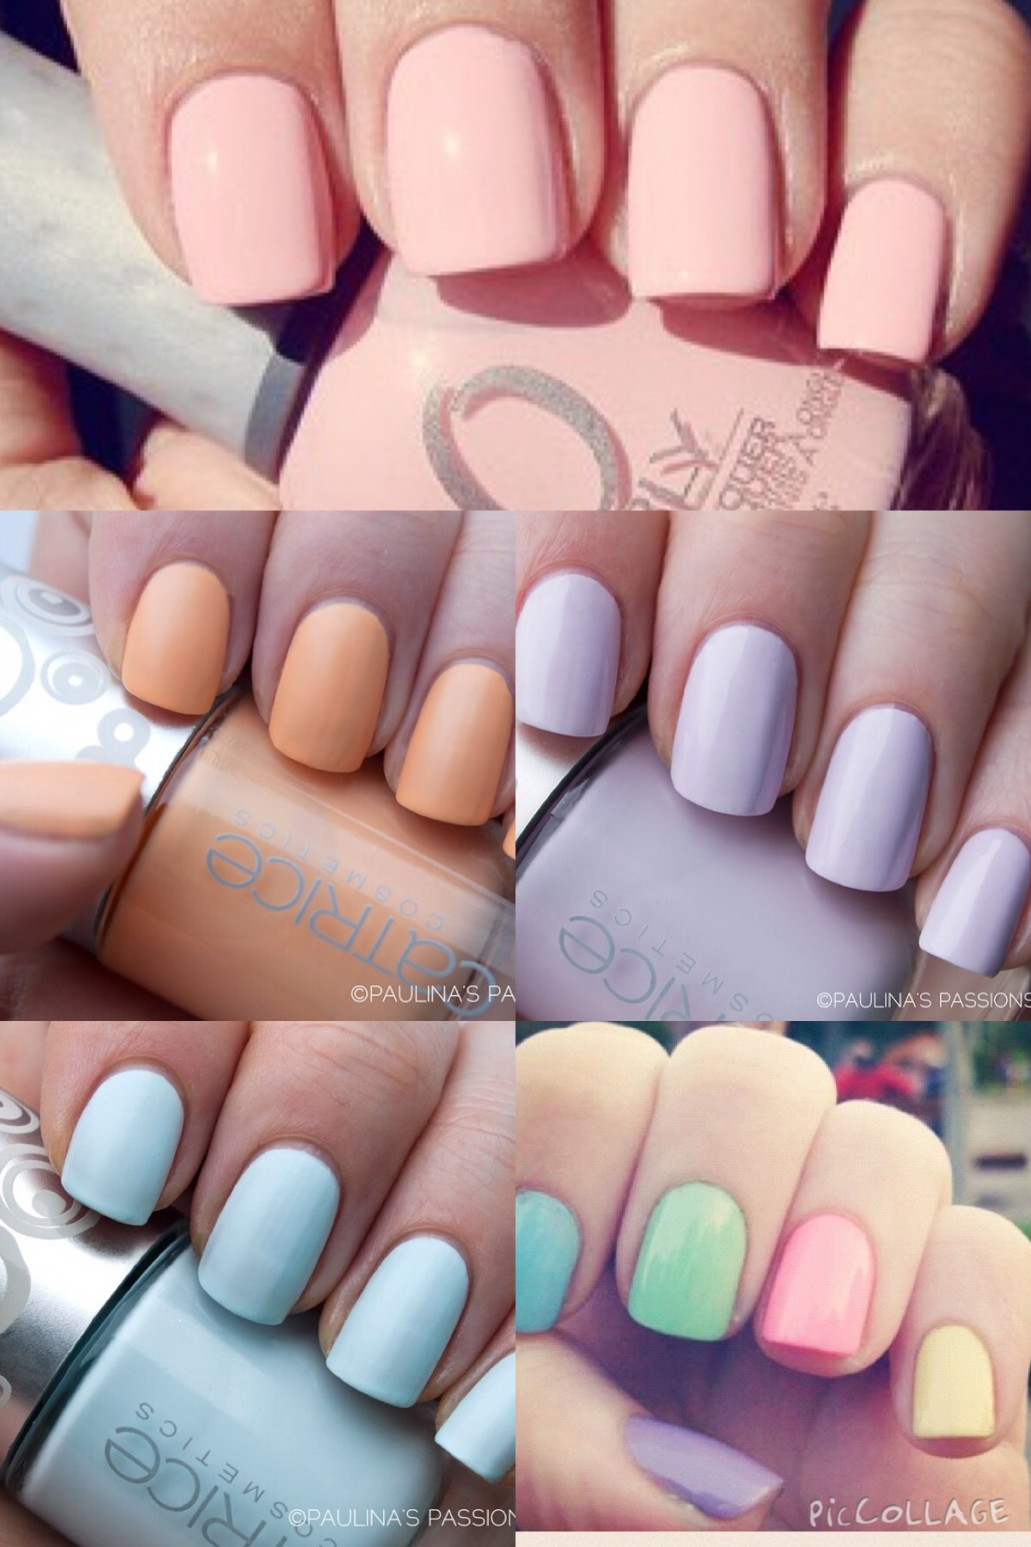 Popular Summer Nail Colors 2020
 Best Nail Polish Shades 2020 for Summer in India Women